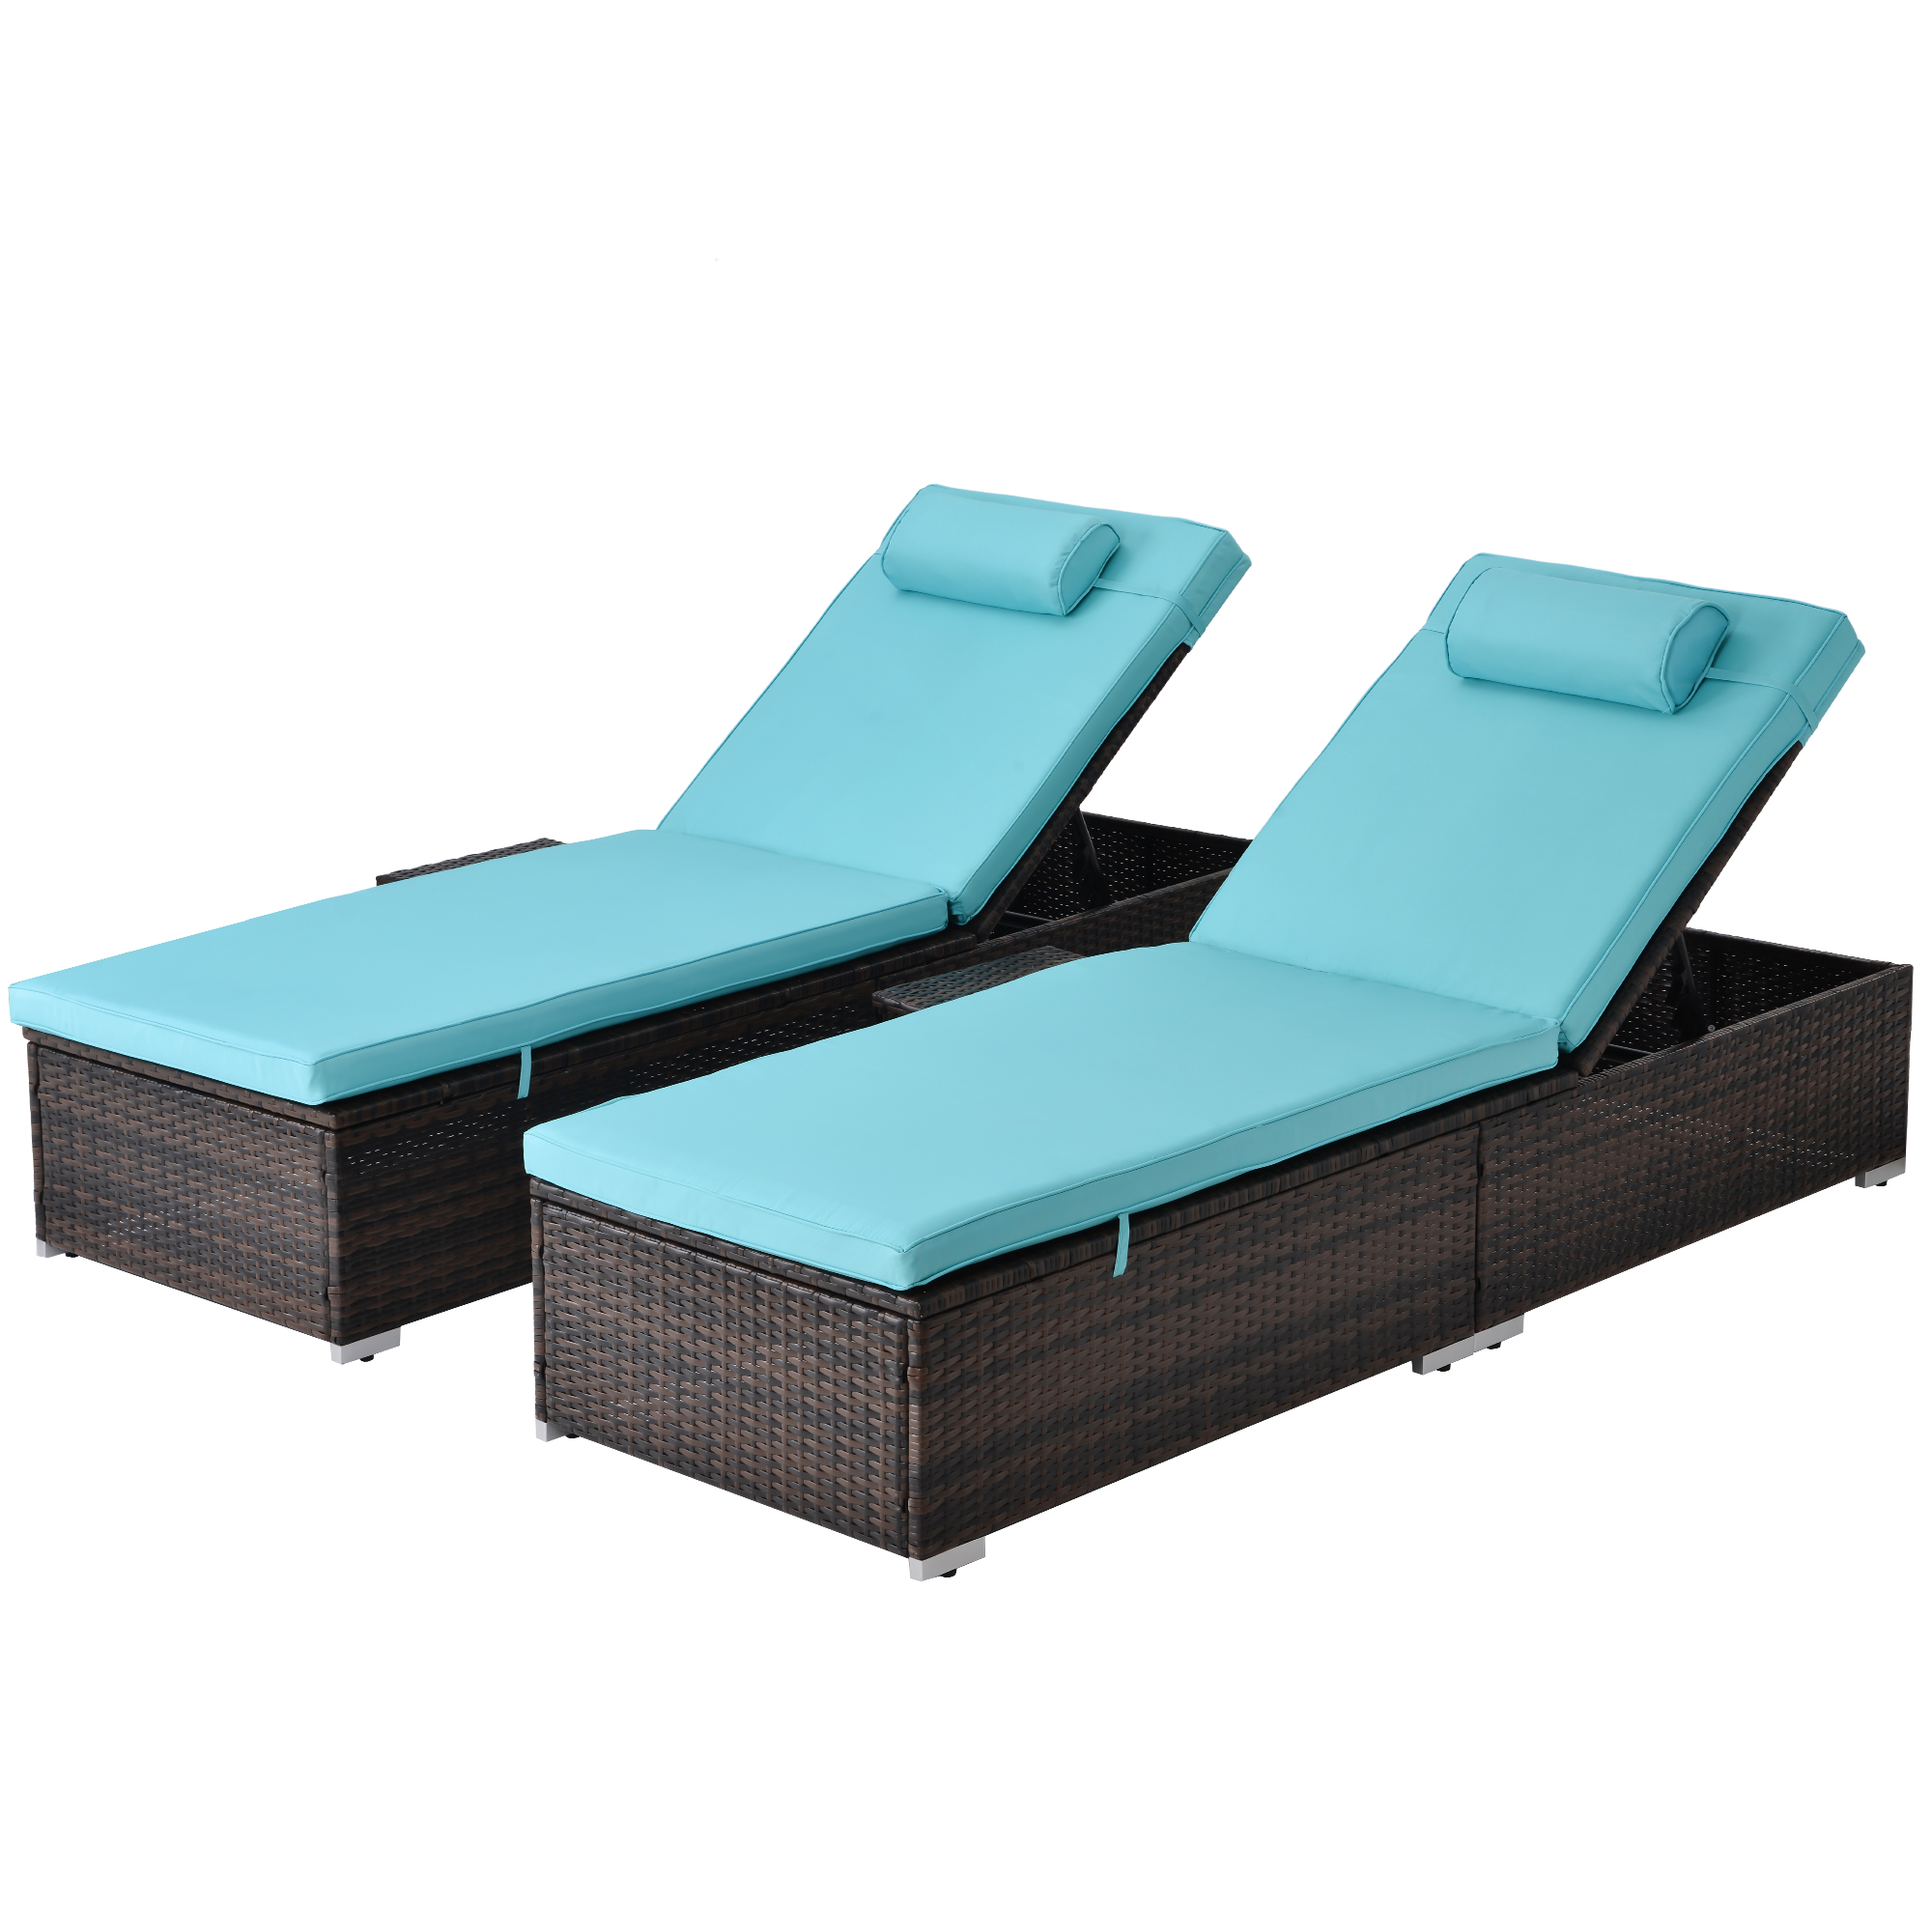 Chaise Lounge Chairs for Outside 2 Pieces, Patio Adjustable Lounge Chairs Set of 2 with Side Table, Outdoor Rattan Wicker Pool Chaise Lounge Chairs Cushioned Poolside Chaise Lounge Set, Blue - image 5 of 10